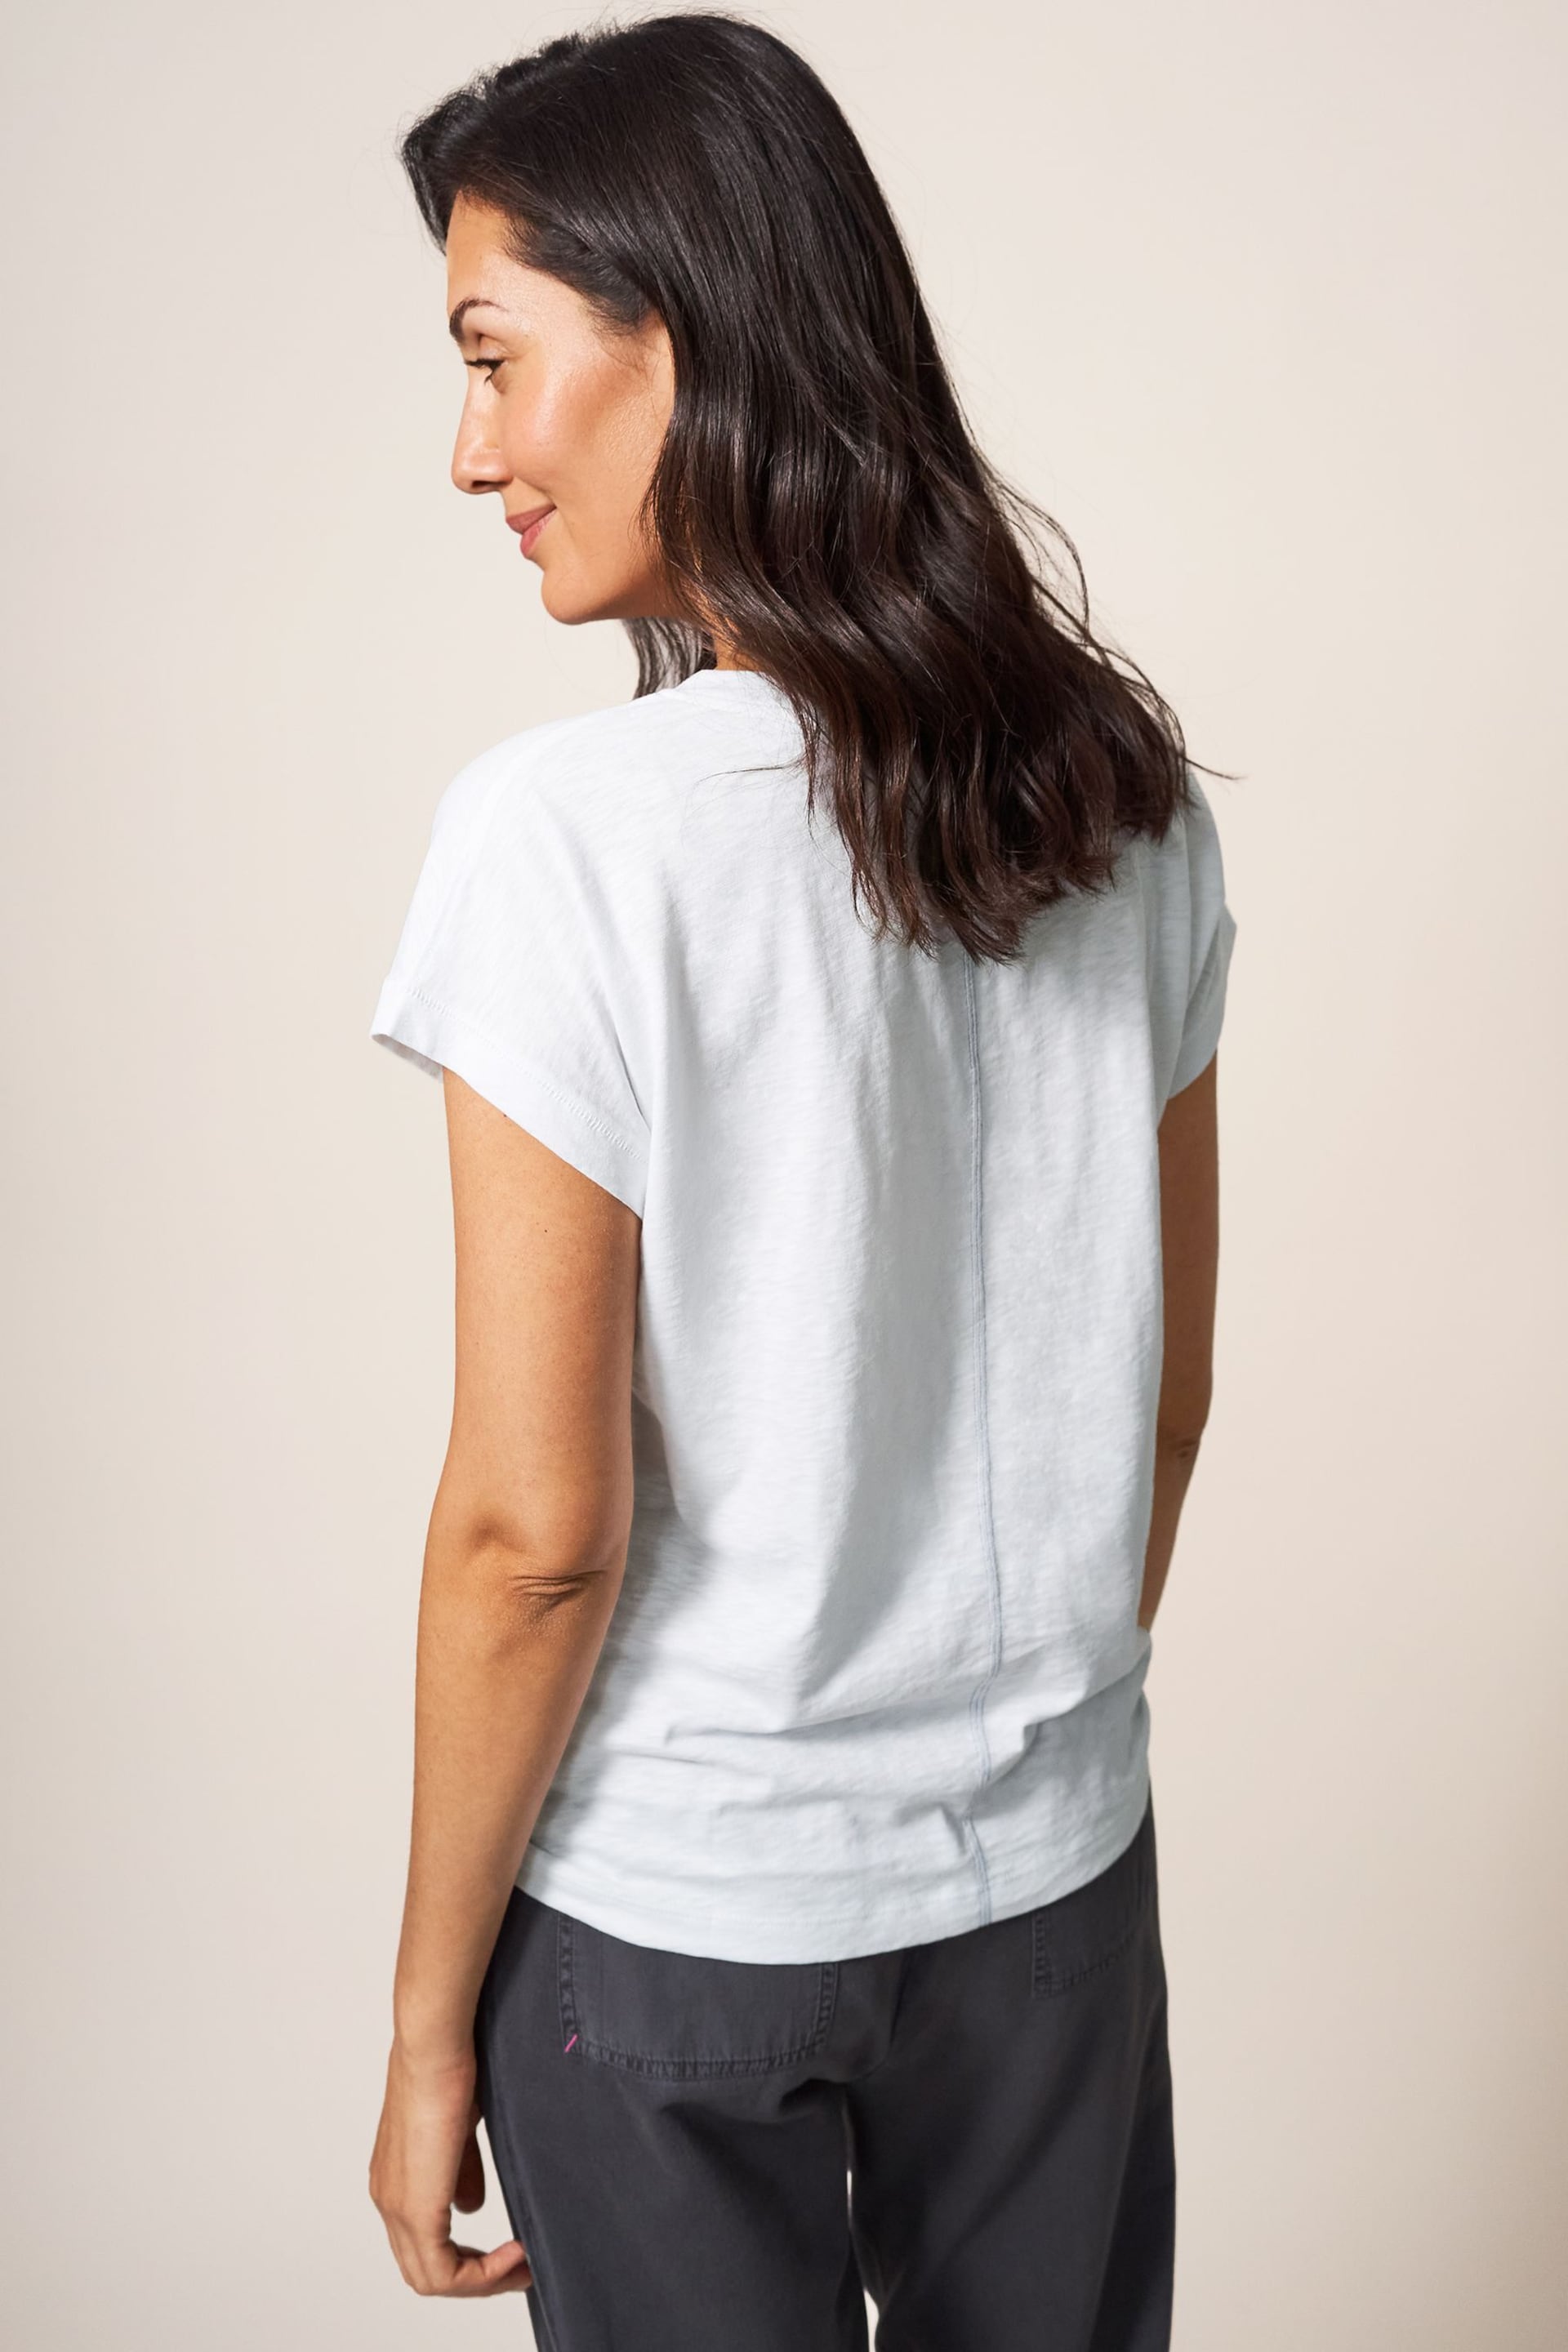 White Stuff Natural Nelly Notch Neck T-Shirt - Image 2 of 4